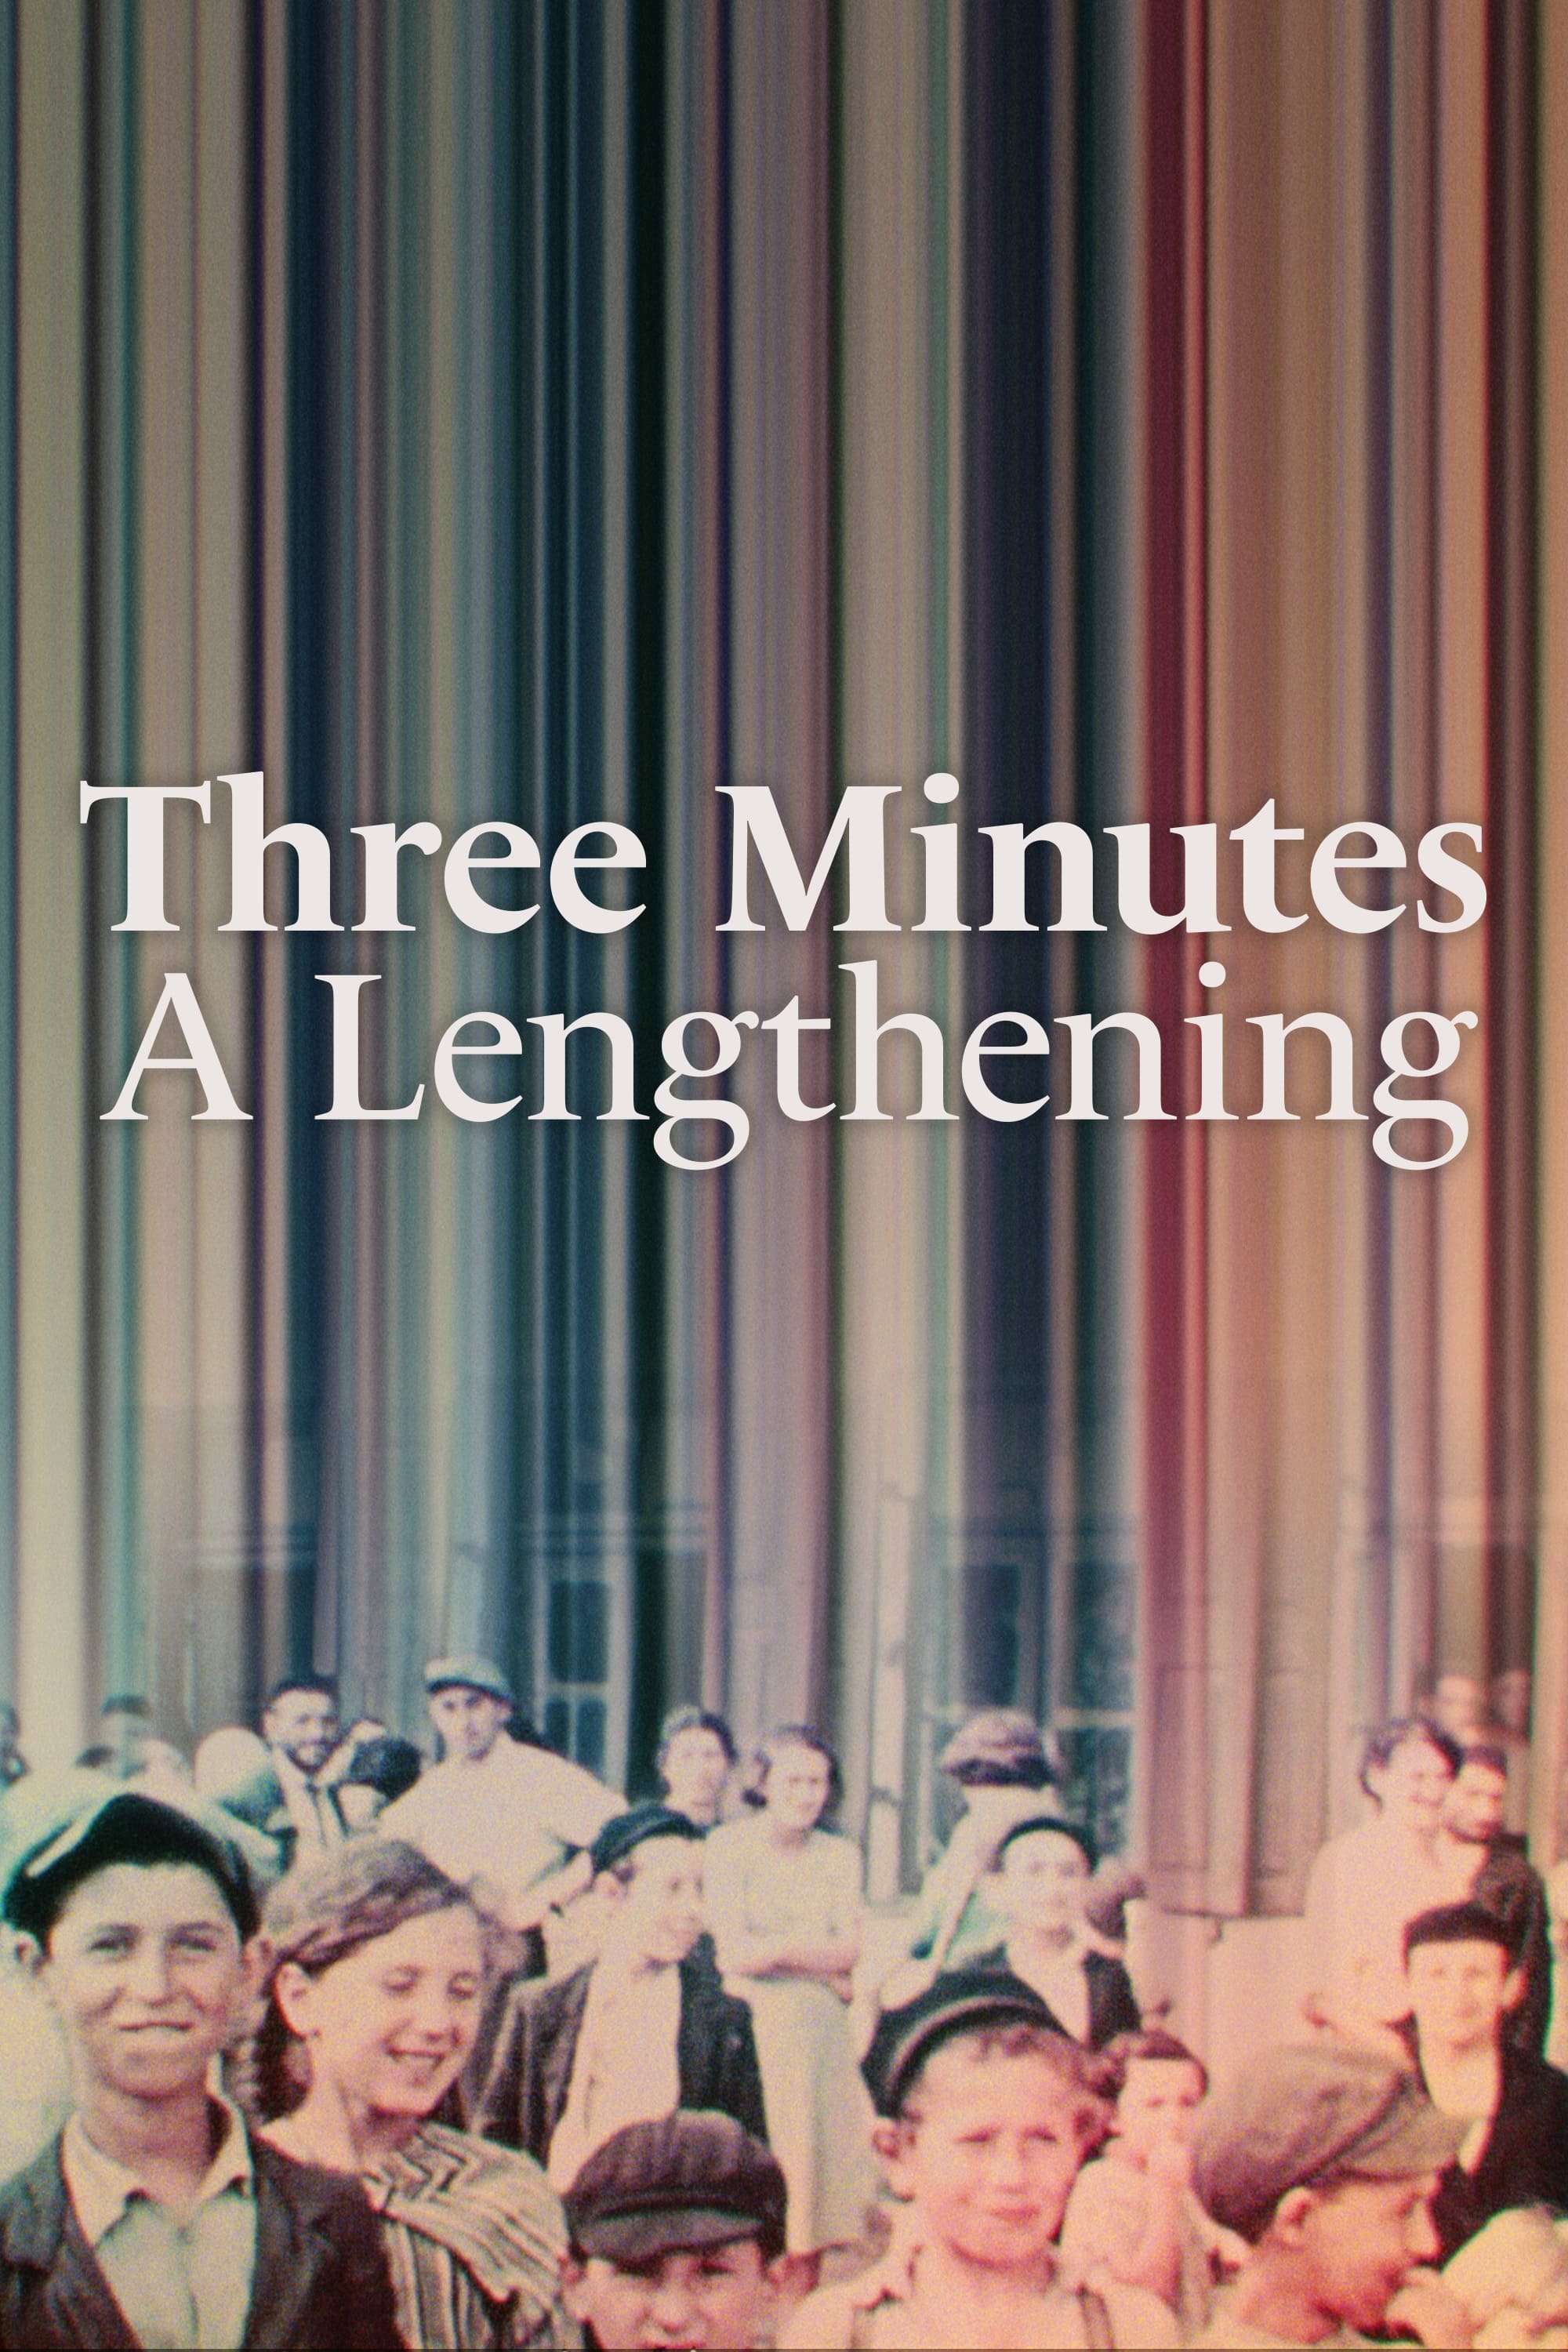 Three Minutes - A Lengthening (2021)